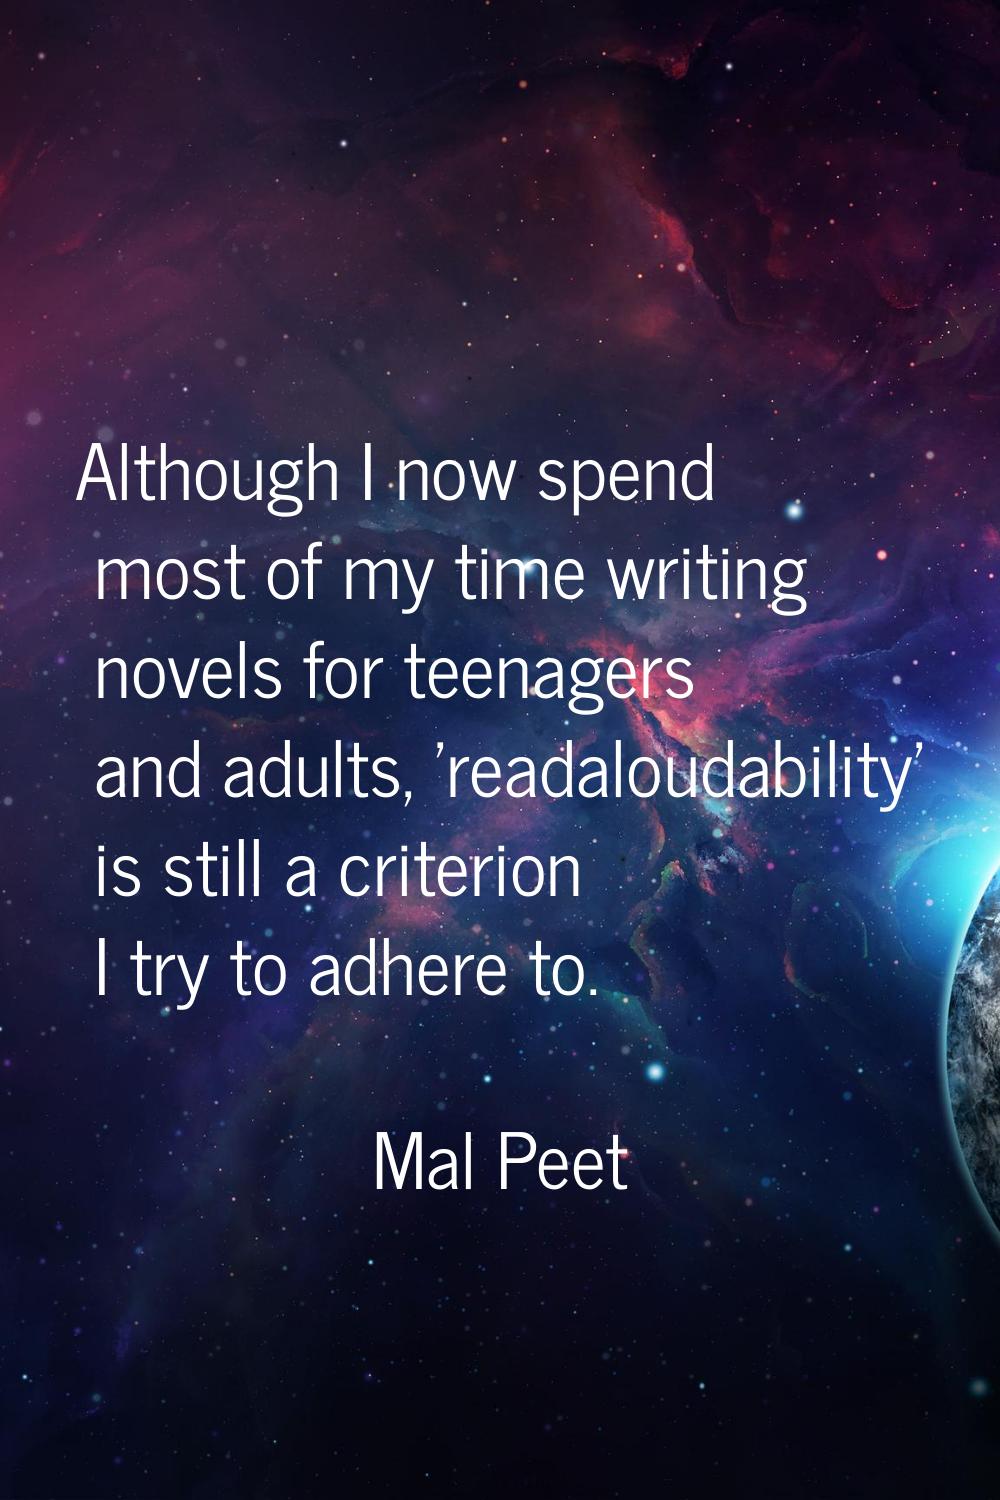 Although I now spend most of my time writing novels for teenagers and adults, 'readaloudability' is